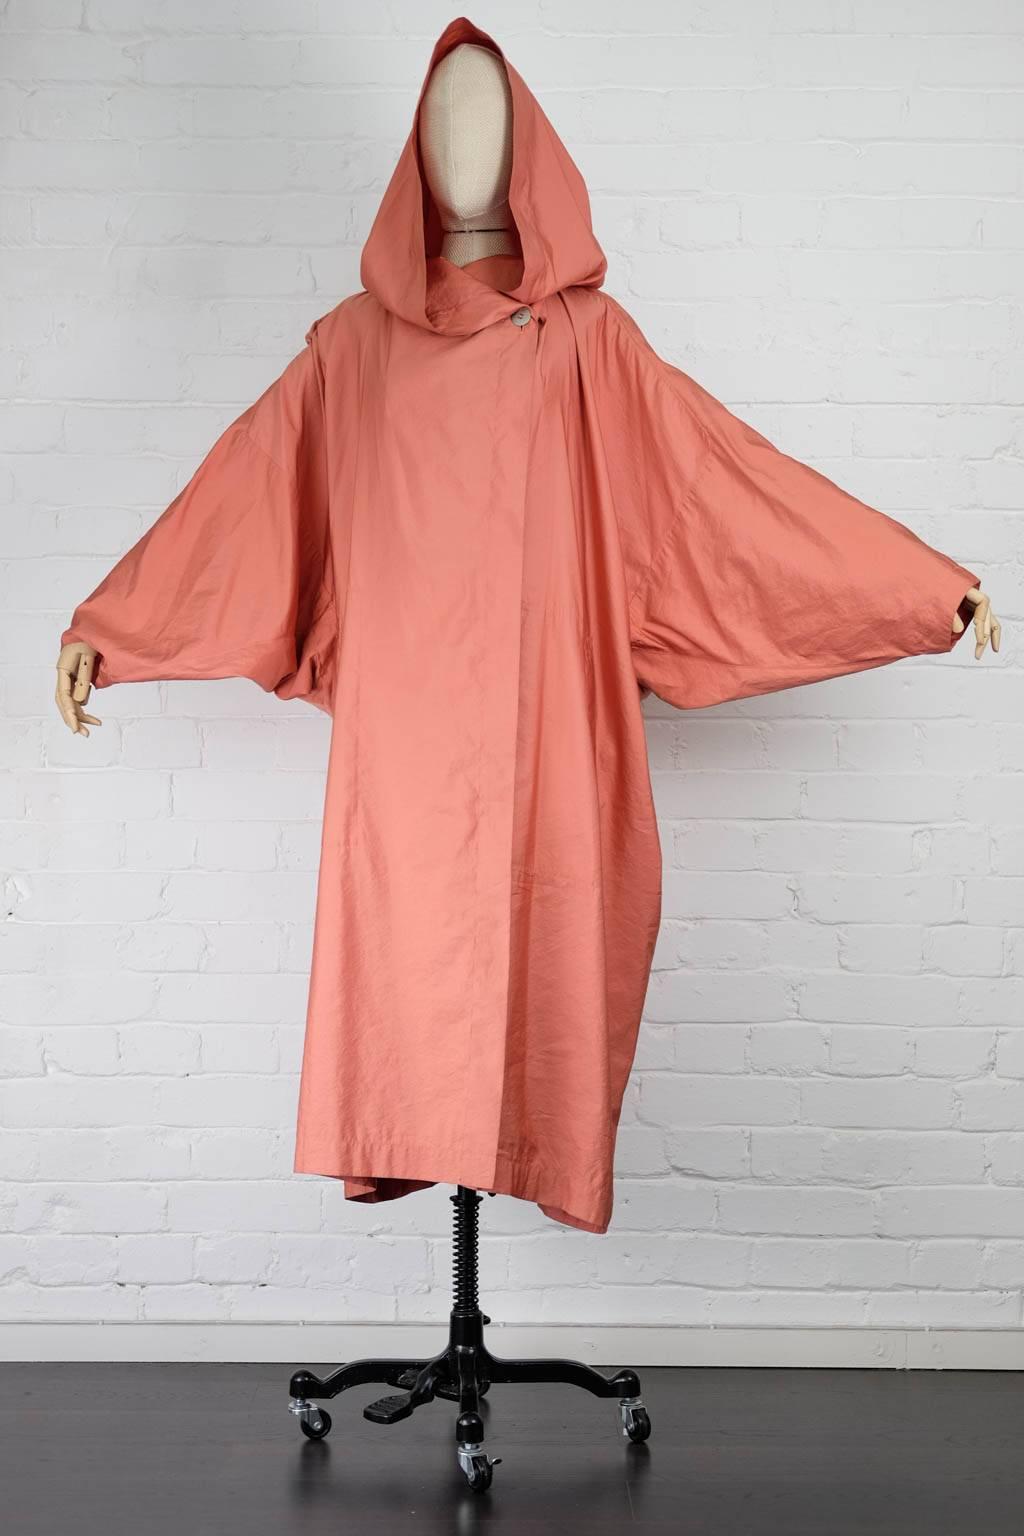 Salmon light hooded coat  circa early 1980s  featuring long sleeves, long length, side pockets and a button fastening on inside and out. 

Total Lenght 117cm
Waist 160cm
Bust 162cm
Shoulders 85cm
Sleeve 60cm
